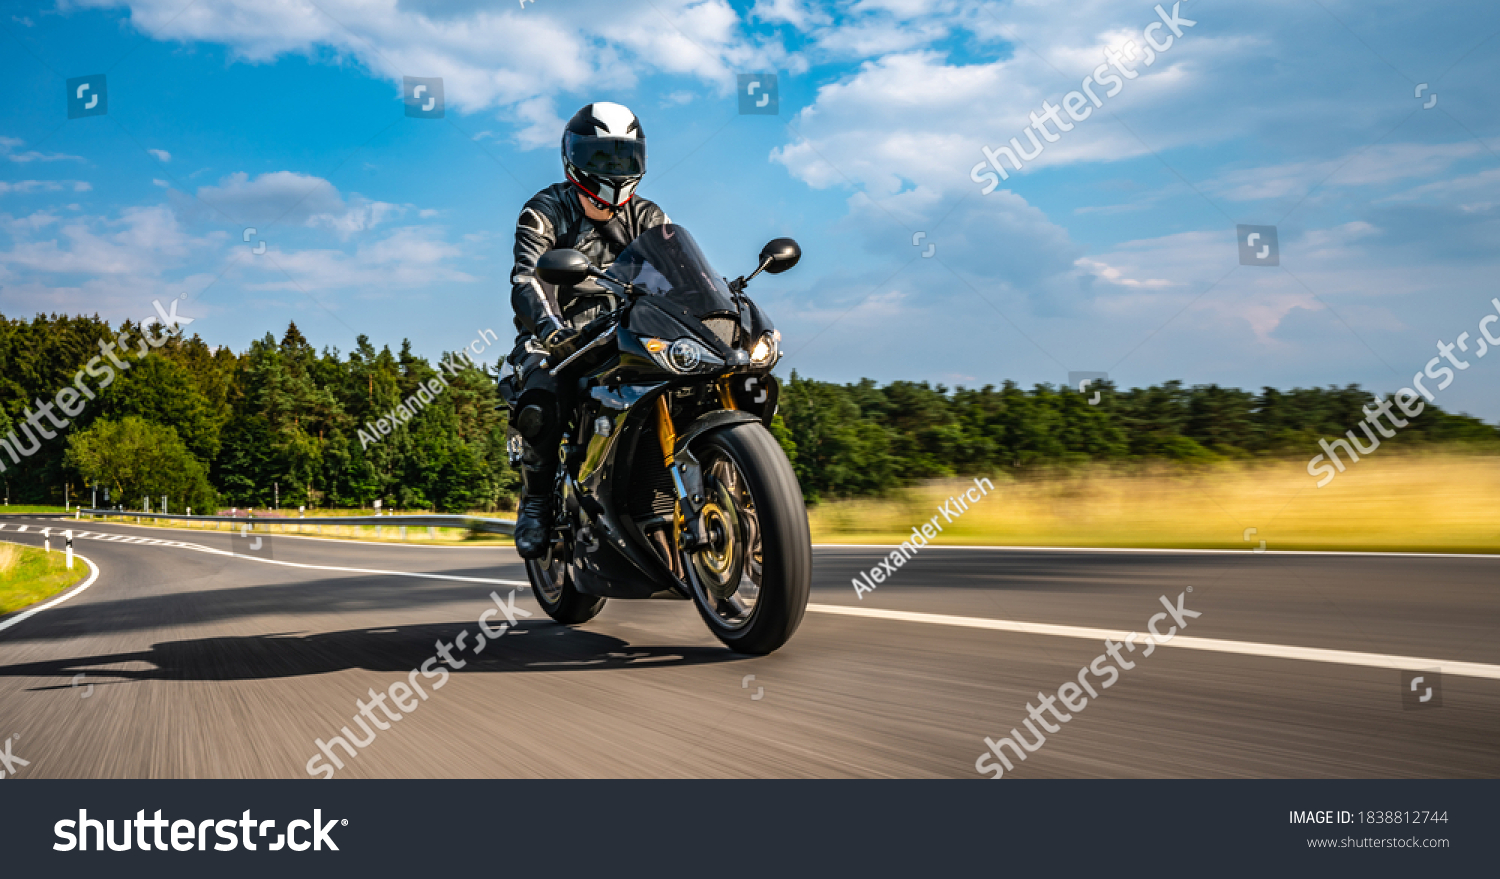 motorbike on the road riding. having fun driving the empty road on a motorcycle tour journey. copyspace for your individual text. Fast Motion Blur effect #1838812744